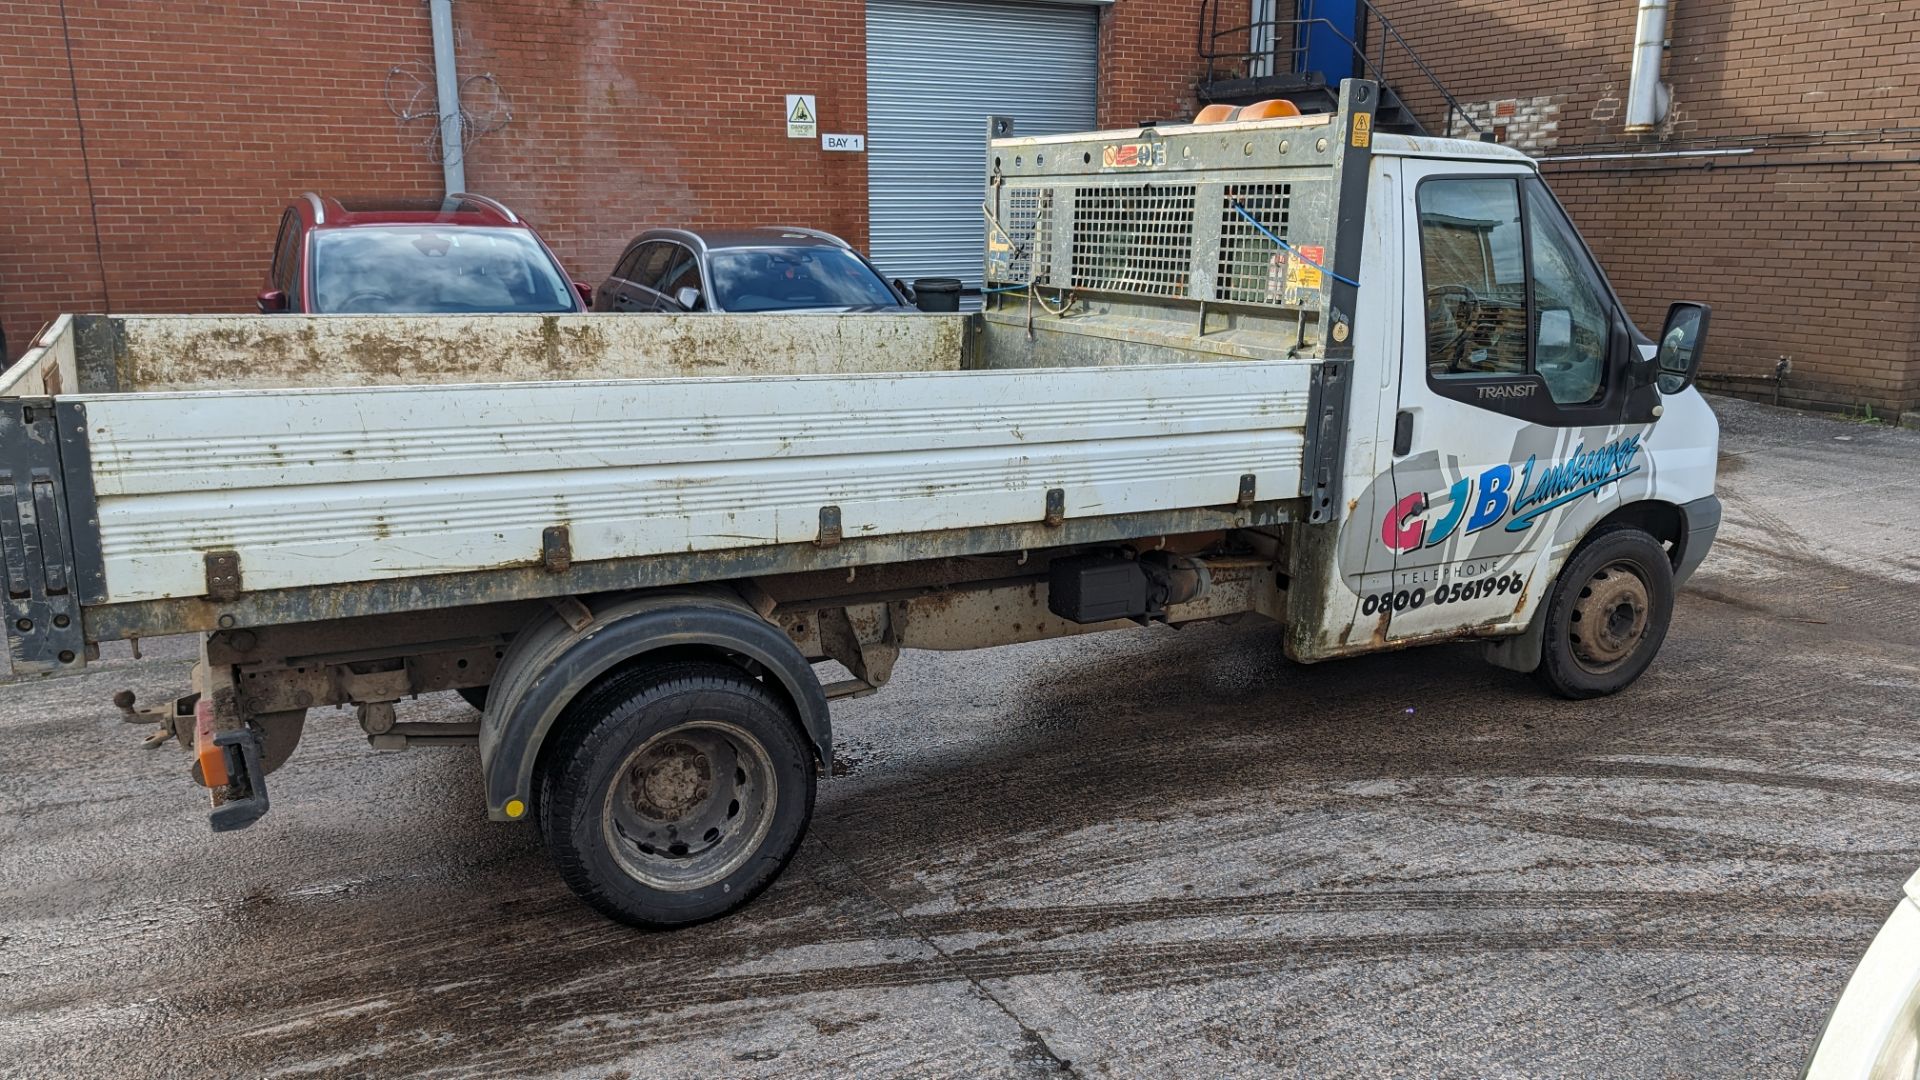 2011 Ford Transit Dropside Tipper - Image 8 of 24